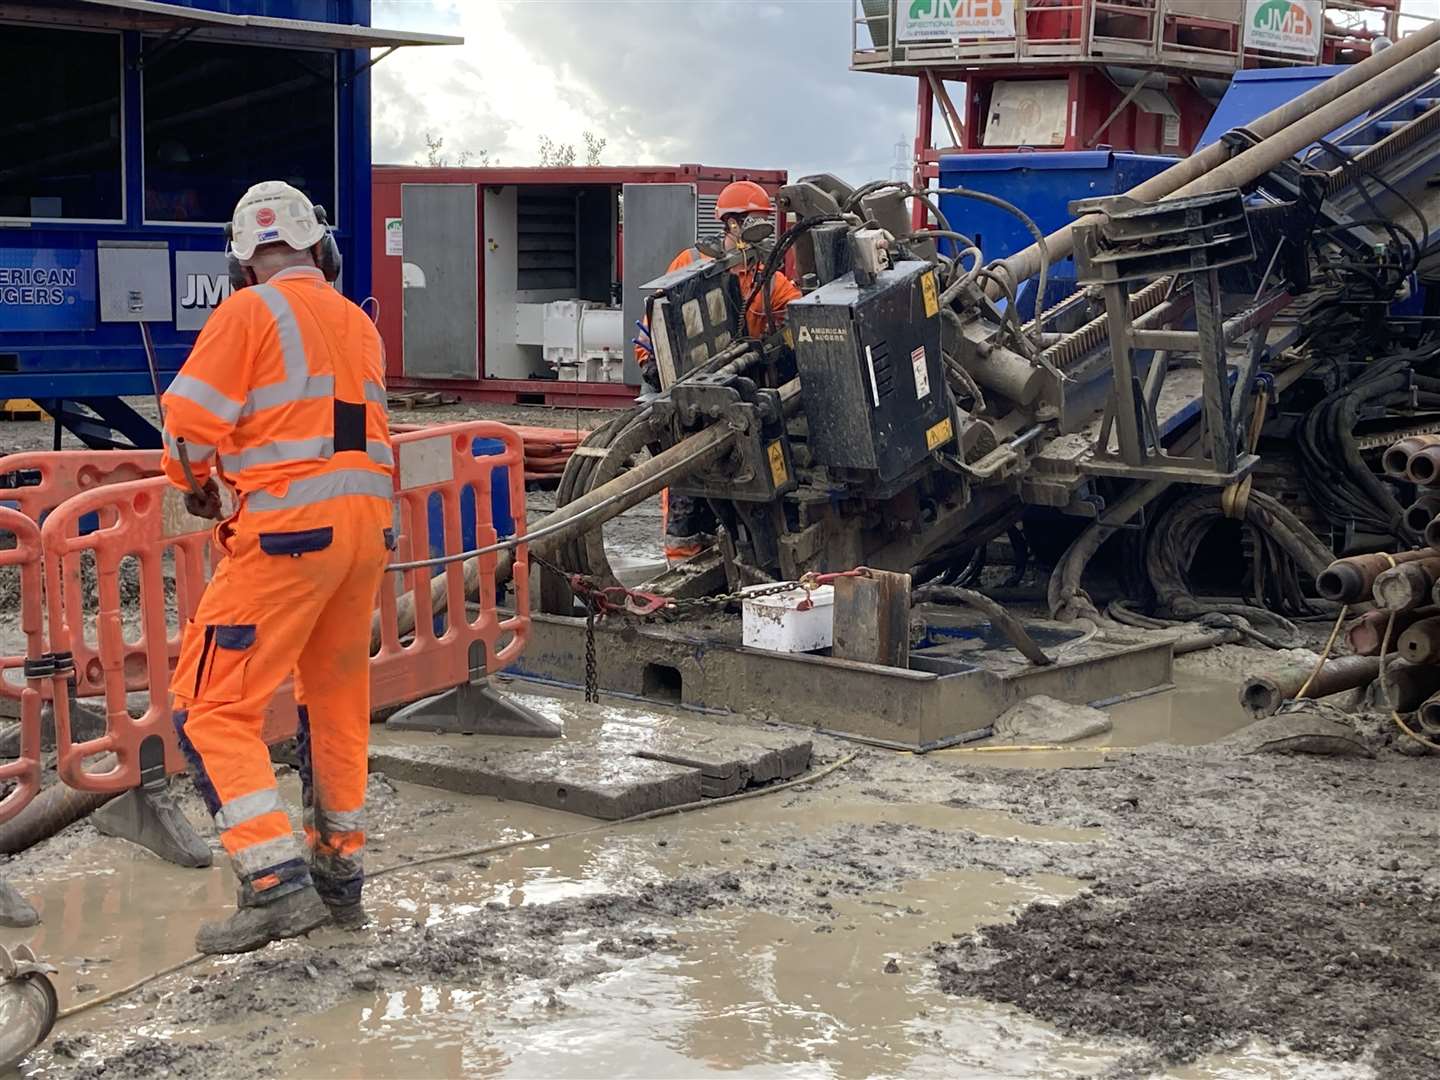 Drilling has began on installing two new pipes under the Swale to serve the Isle of Sheppey as part of a £3m scheme by Southern Water